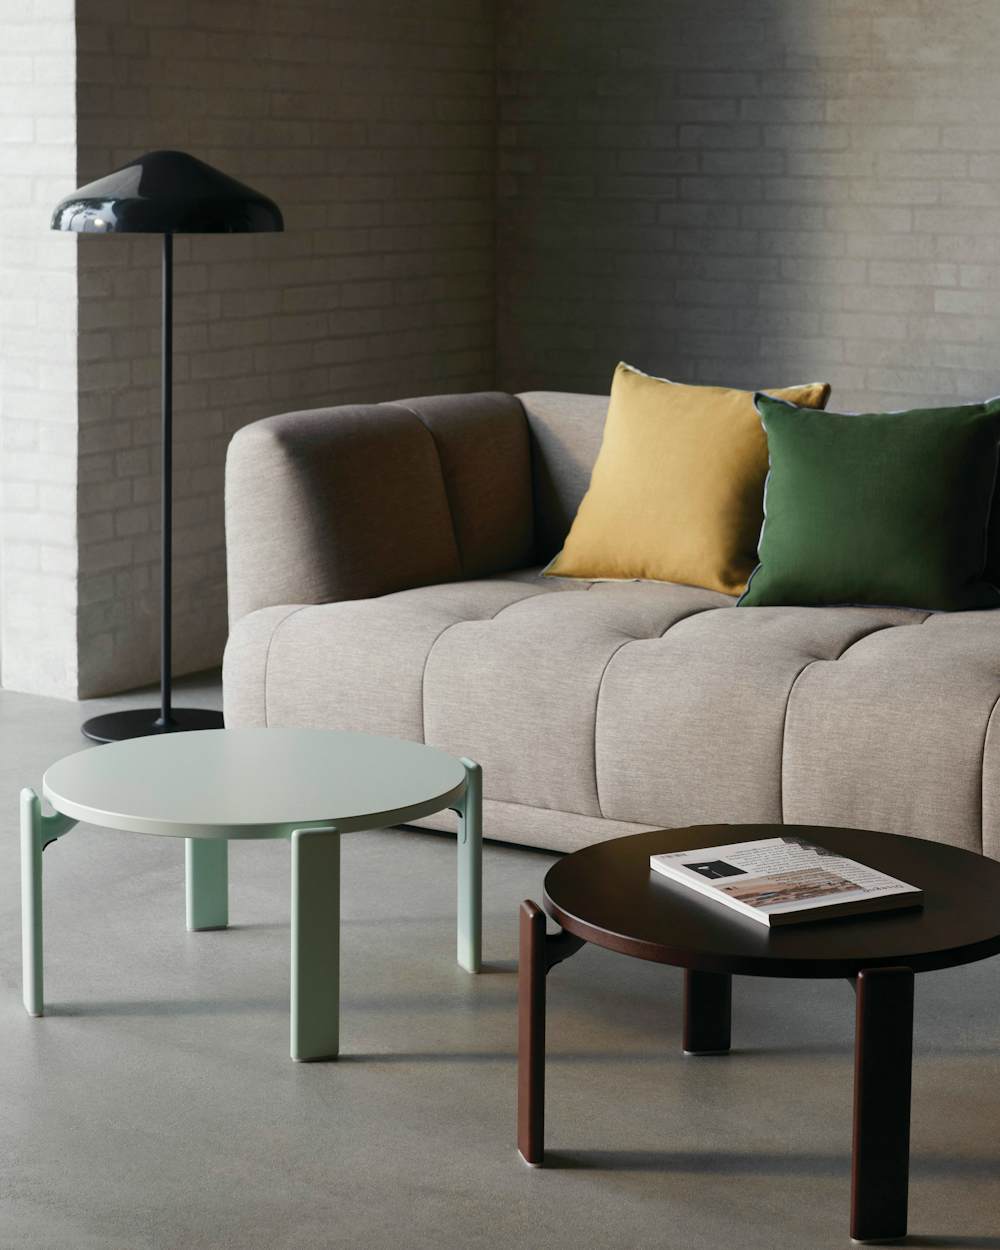 Pao Steel Floor Lamp, Rey Coffee Tables, and Quilton Sofa